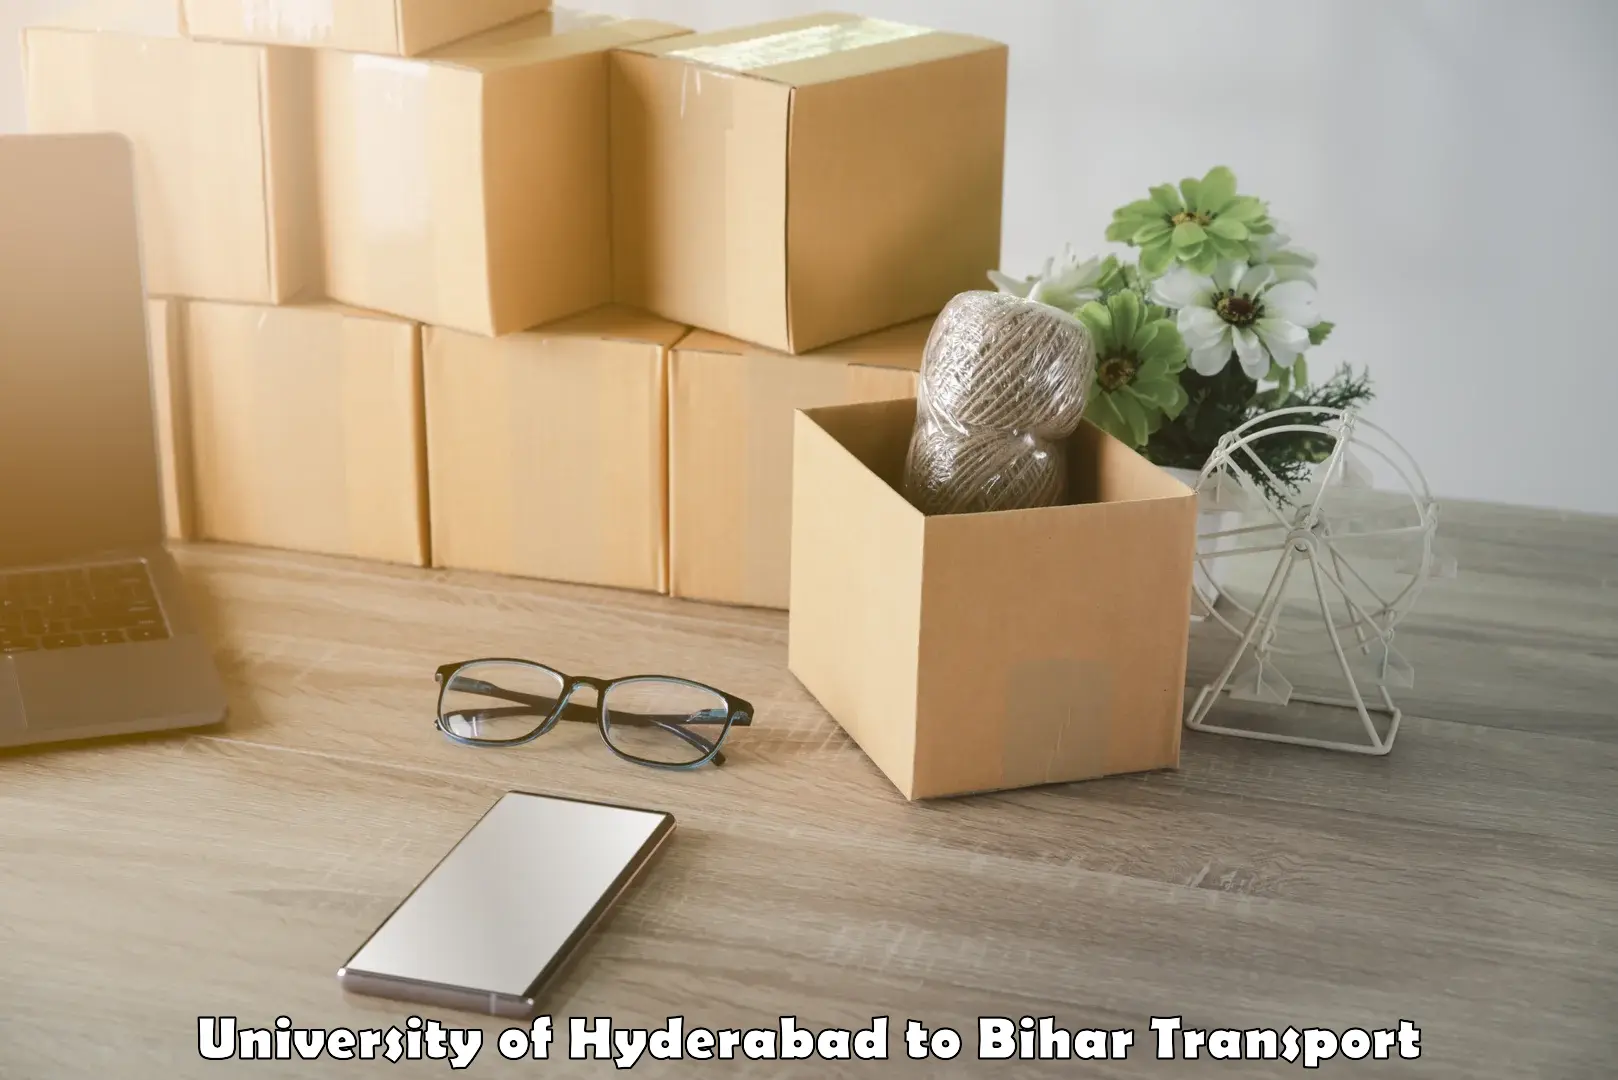 Sending bike to another city University of Hyderabad to Singhia